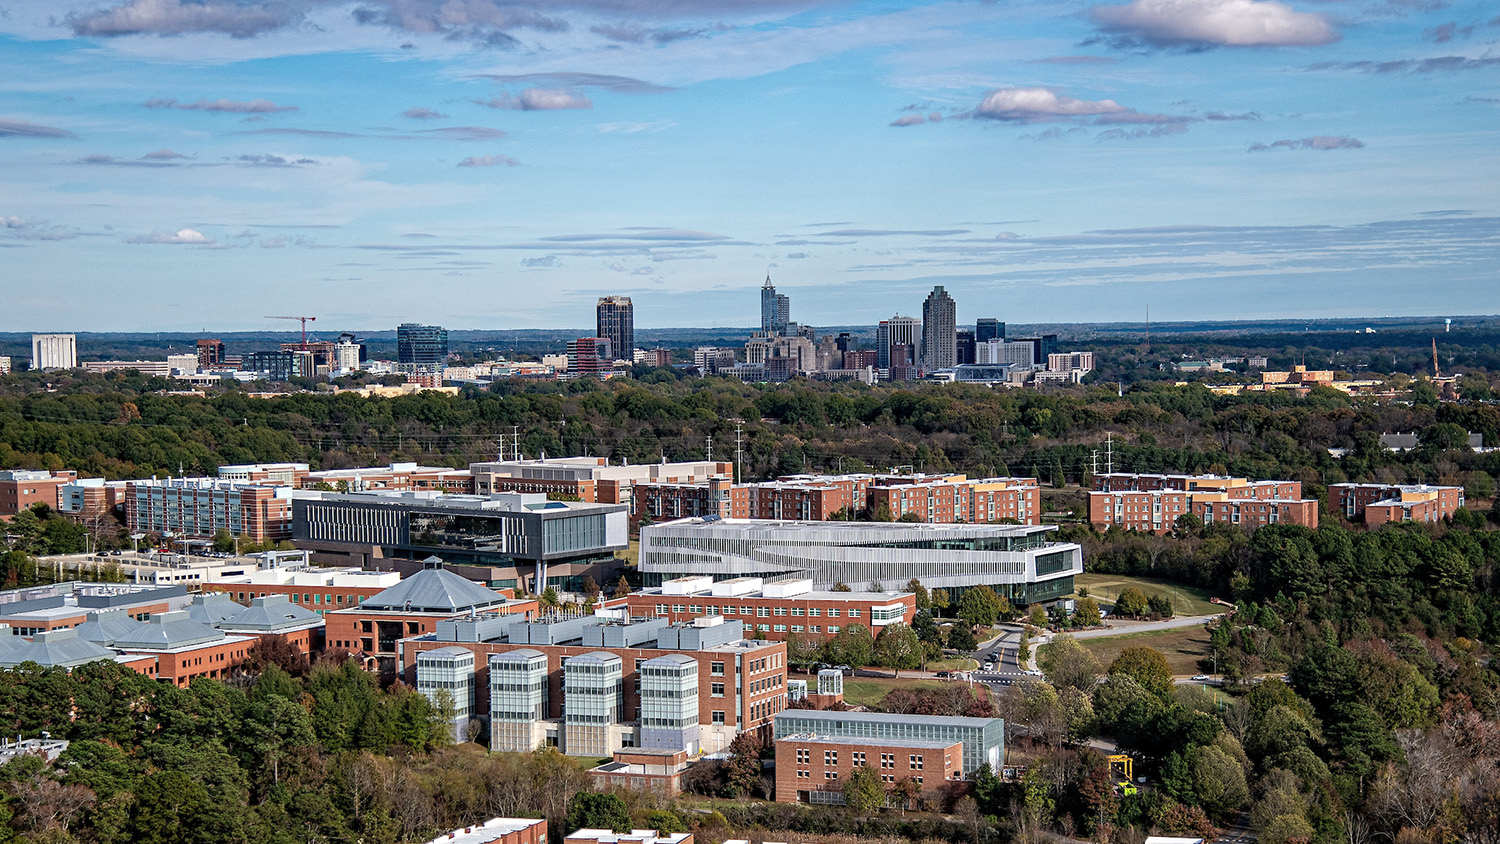 A view of NC State's Centennial Campus with the Downtown Raleigh skyline on the horizon.